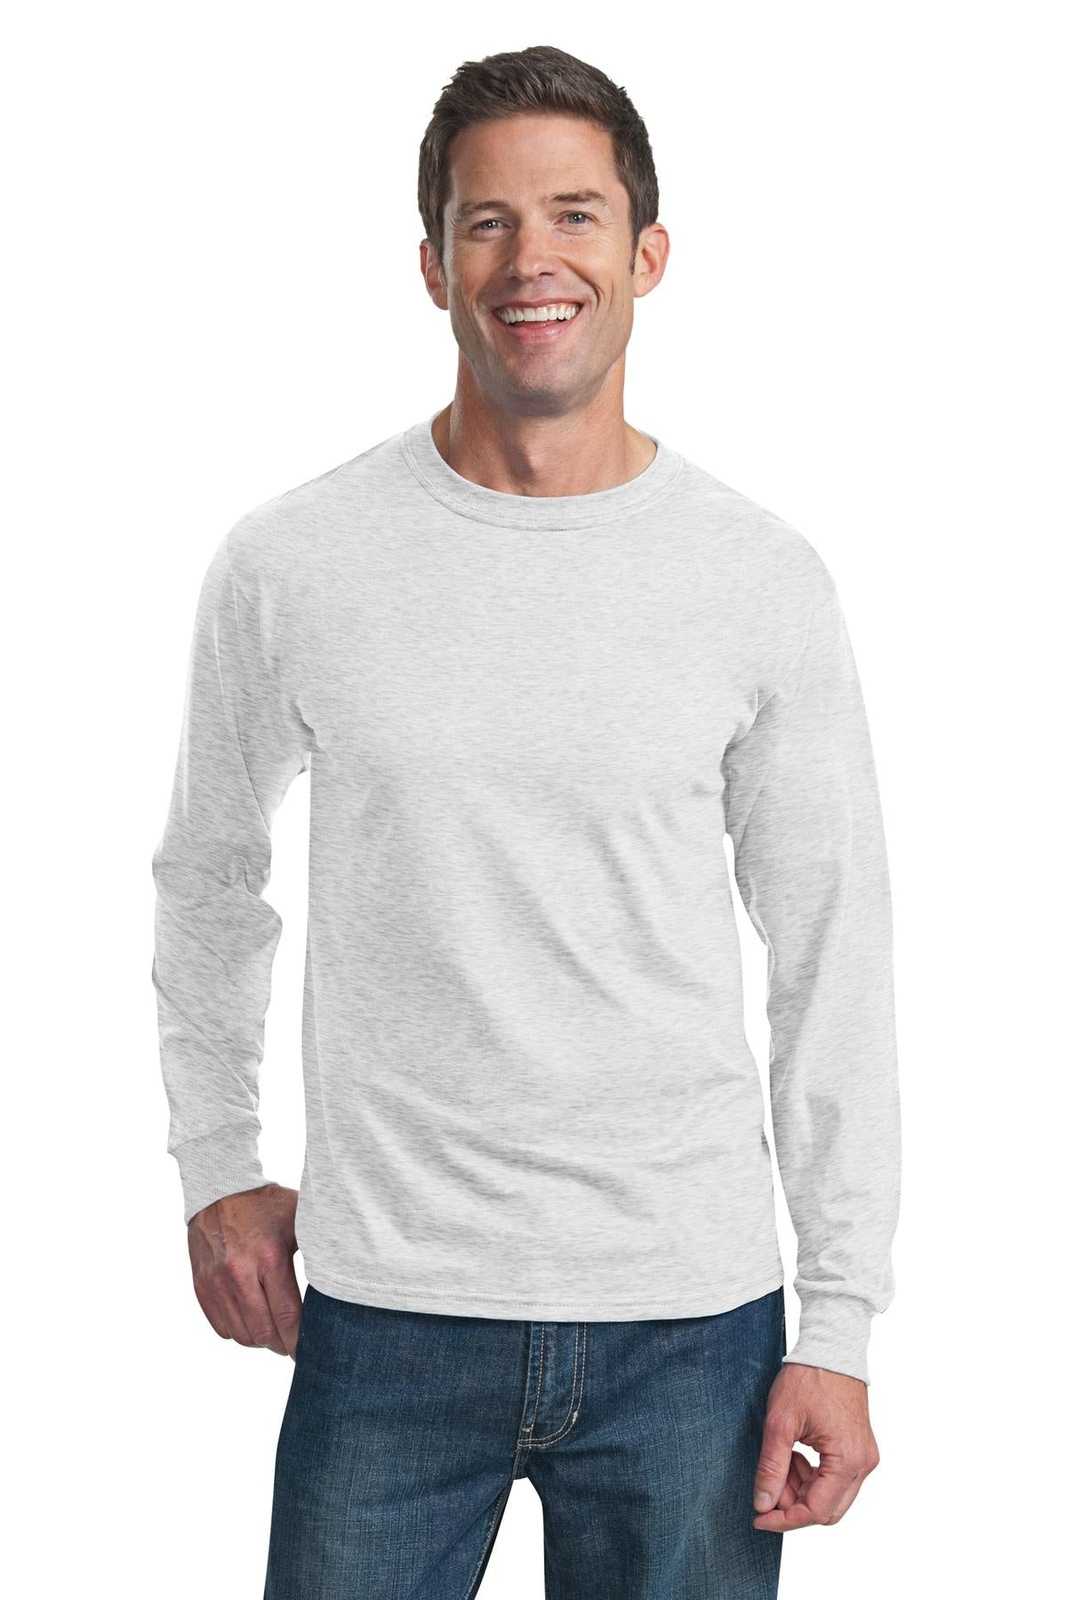 Fruit of the Loom 4930 HD Cotton 100% Cotton Long Sleeve T-Shirt - Ash - HIT a Double